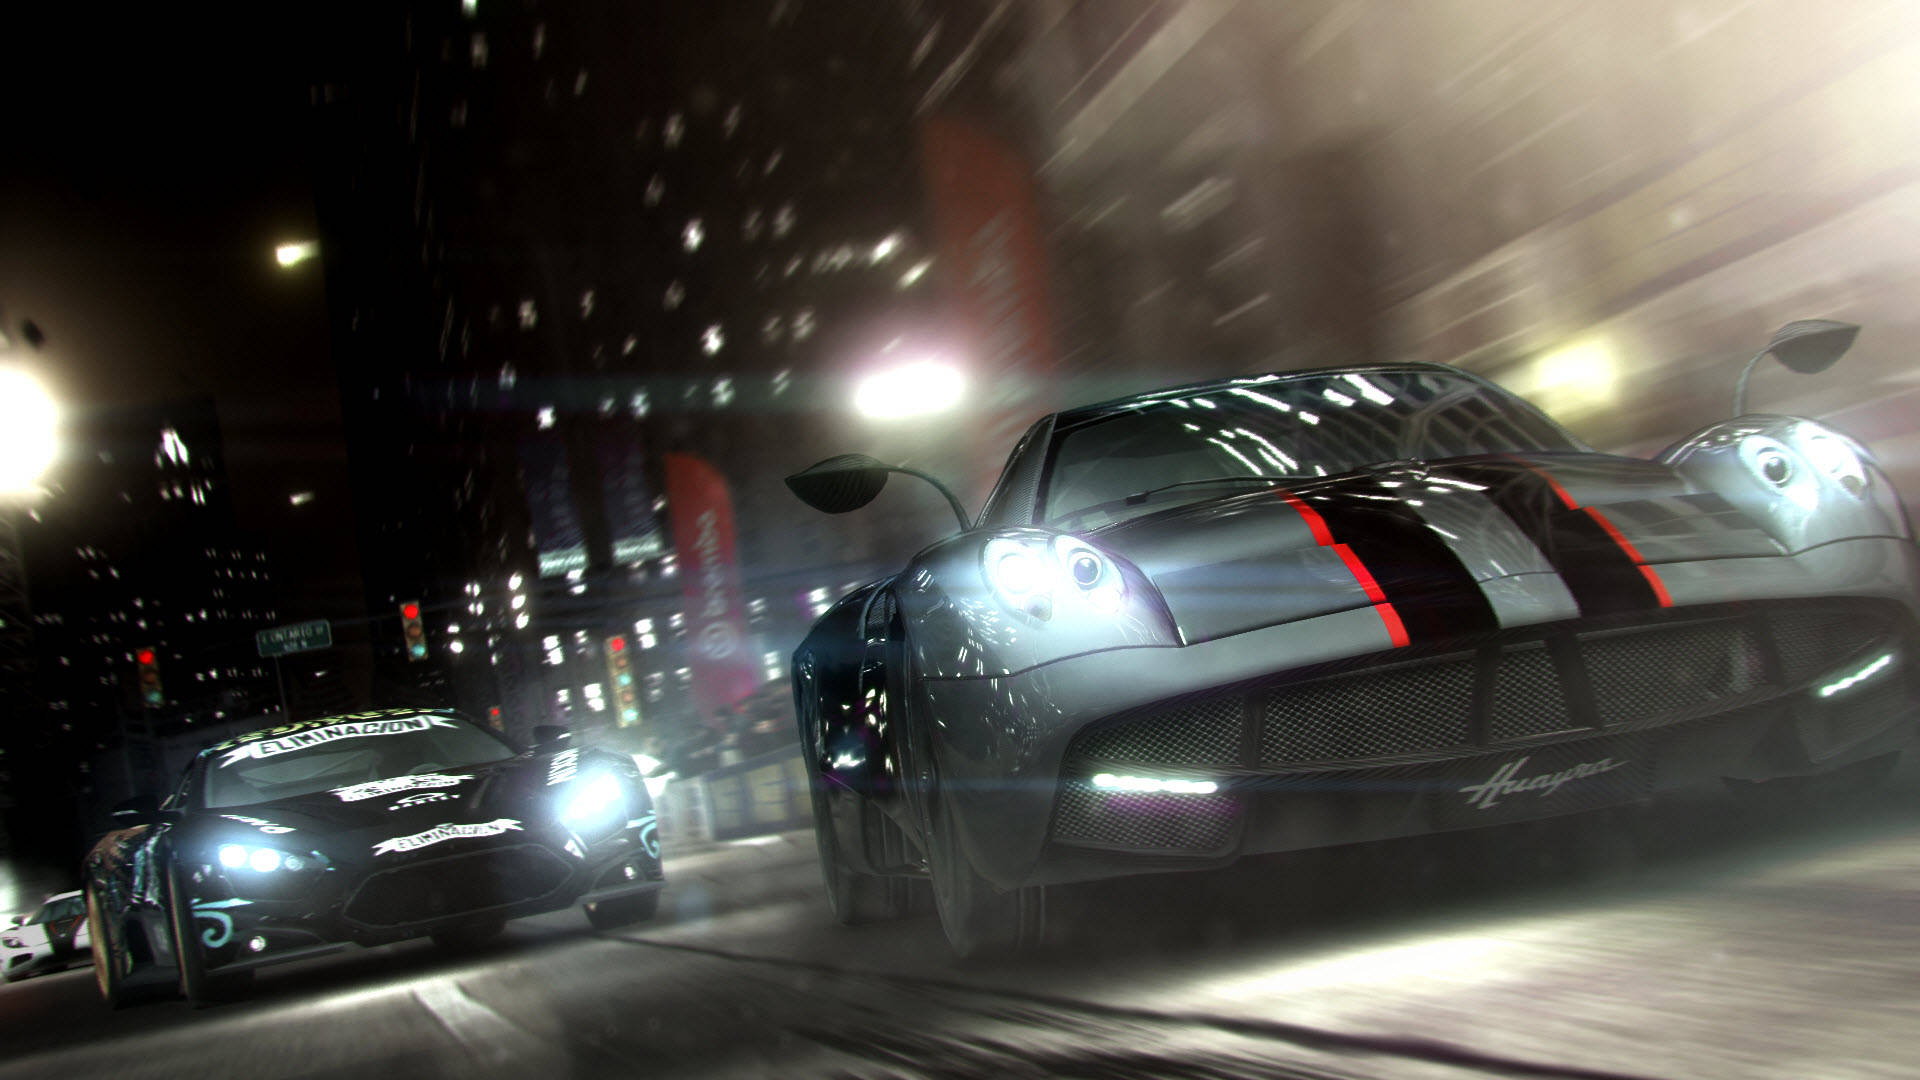 Fast-paced Racing in the City: Grid 2 Wallpaper